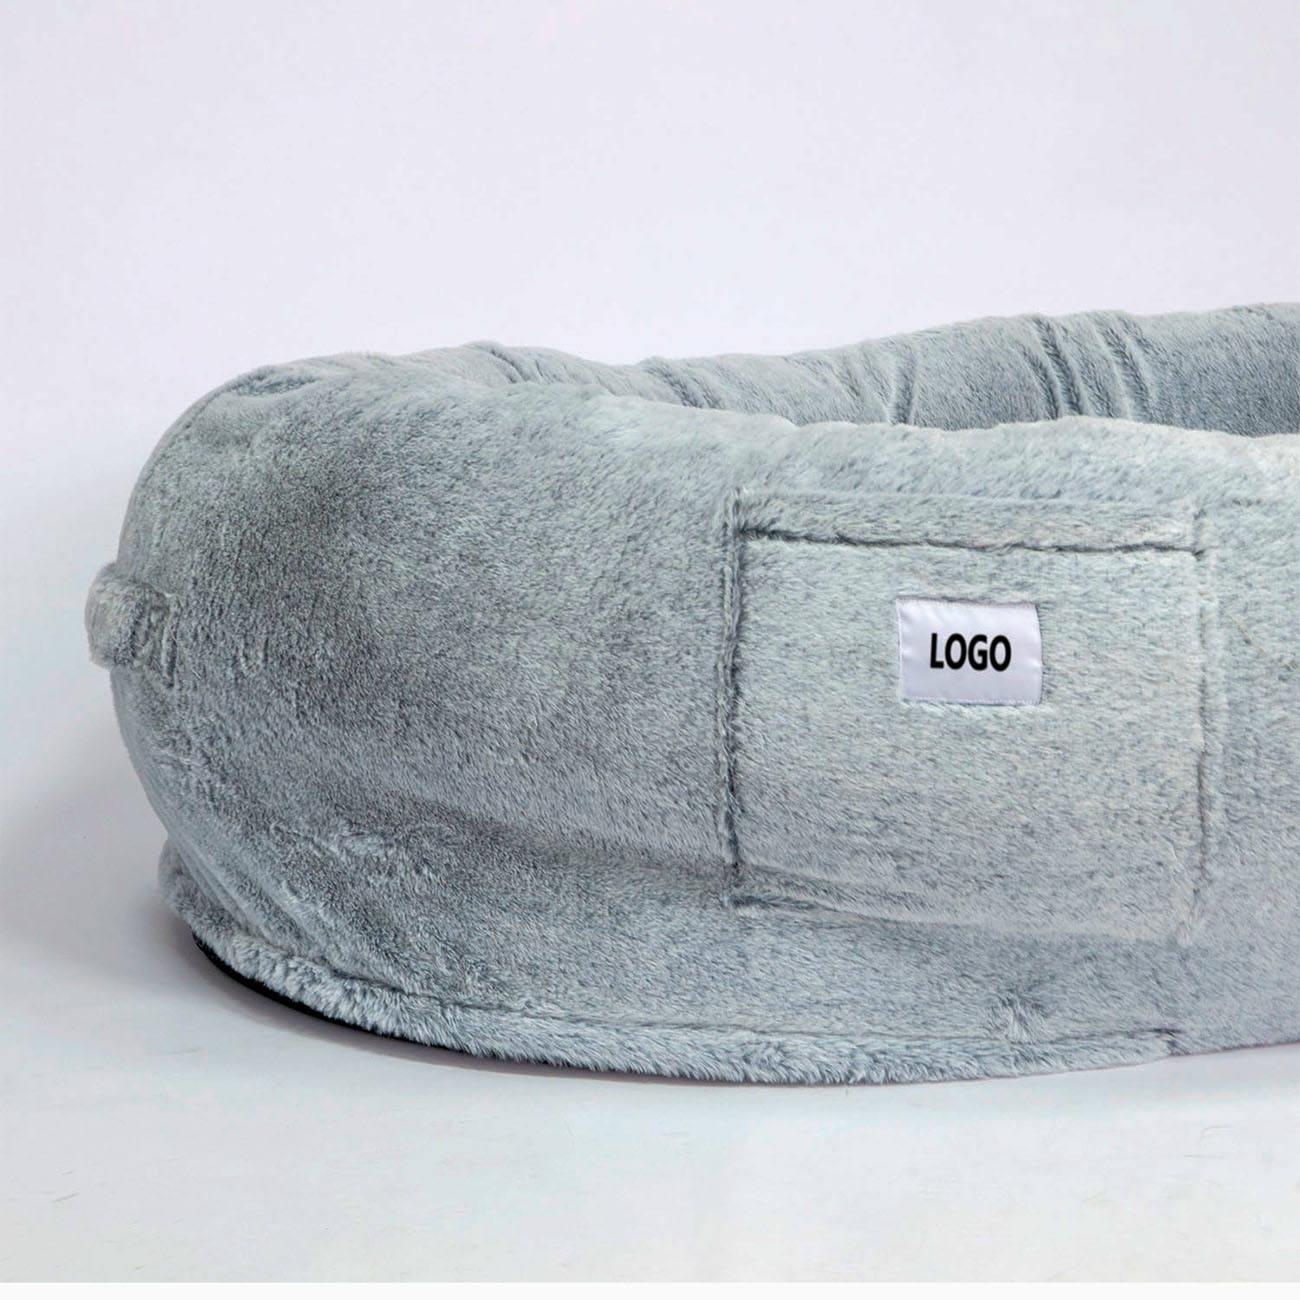 Giant Dog Bed For Humans Dog Human Bed And Dog Bed Human Size